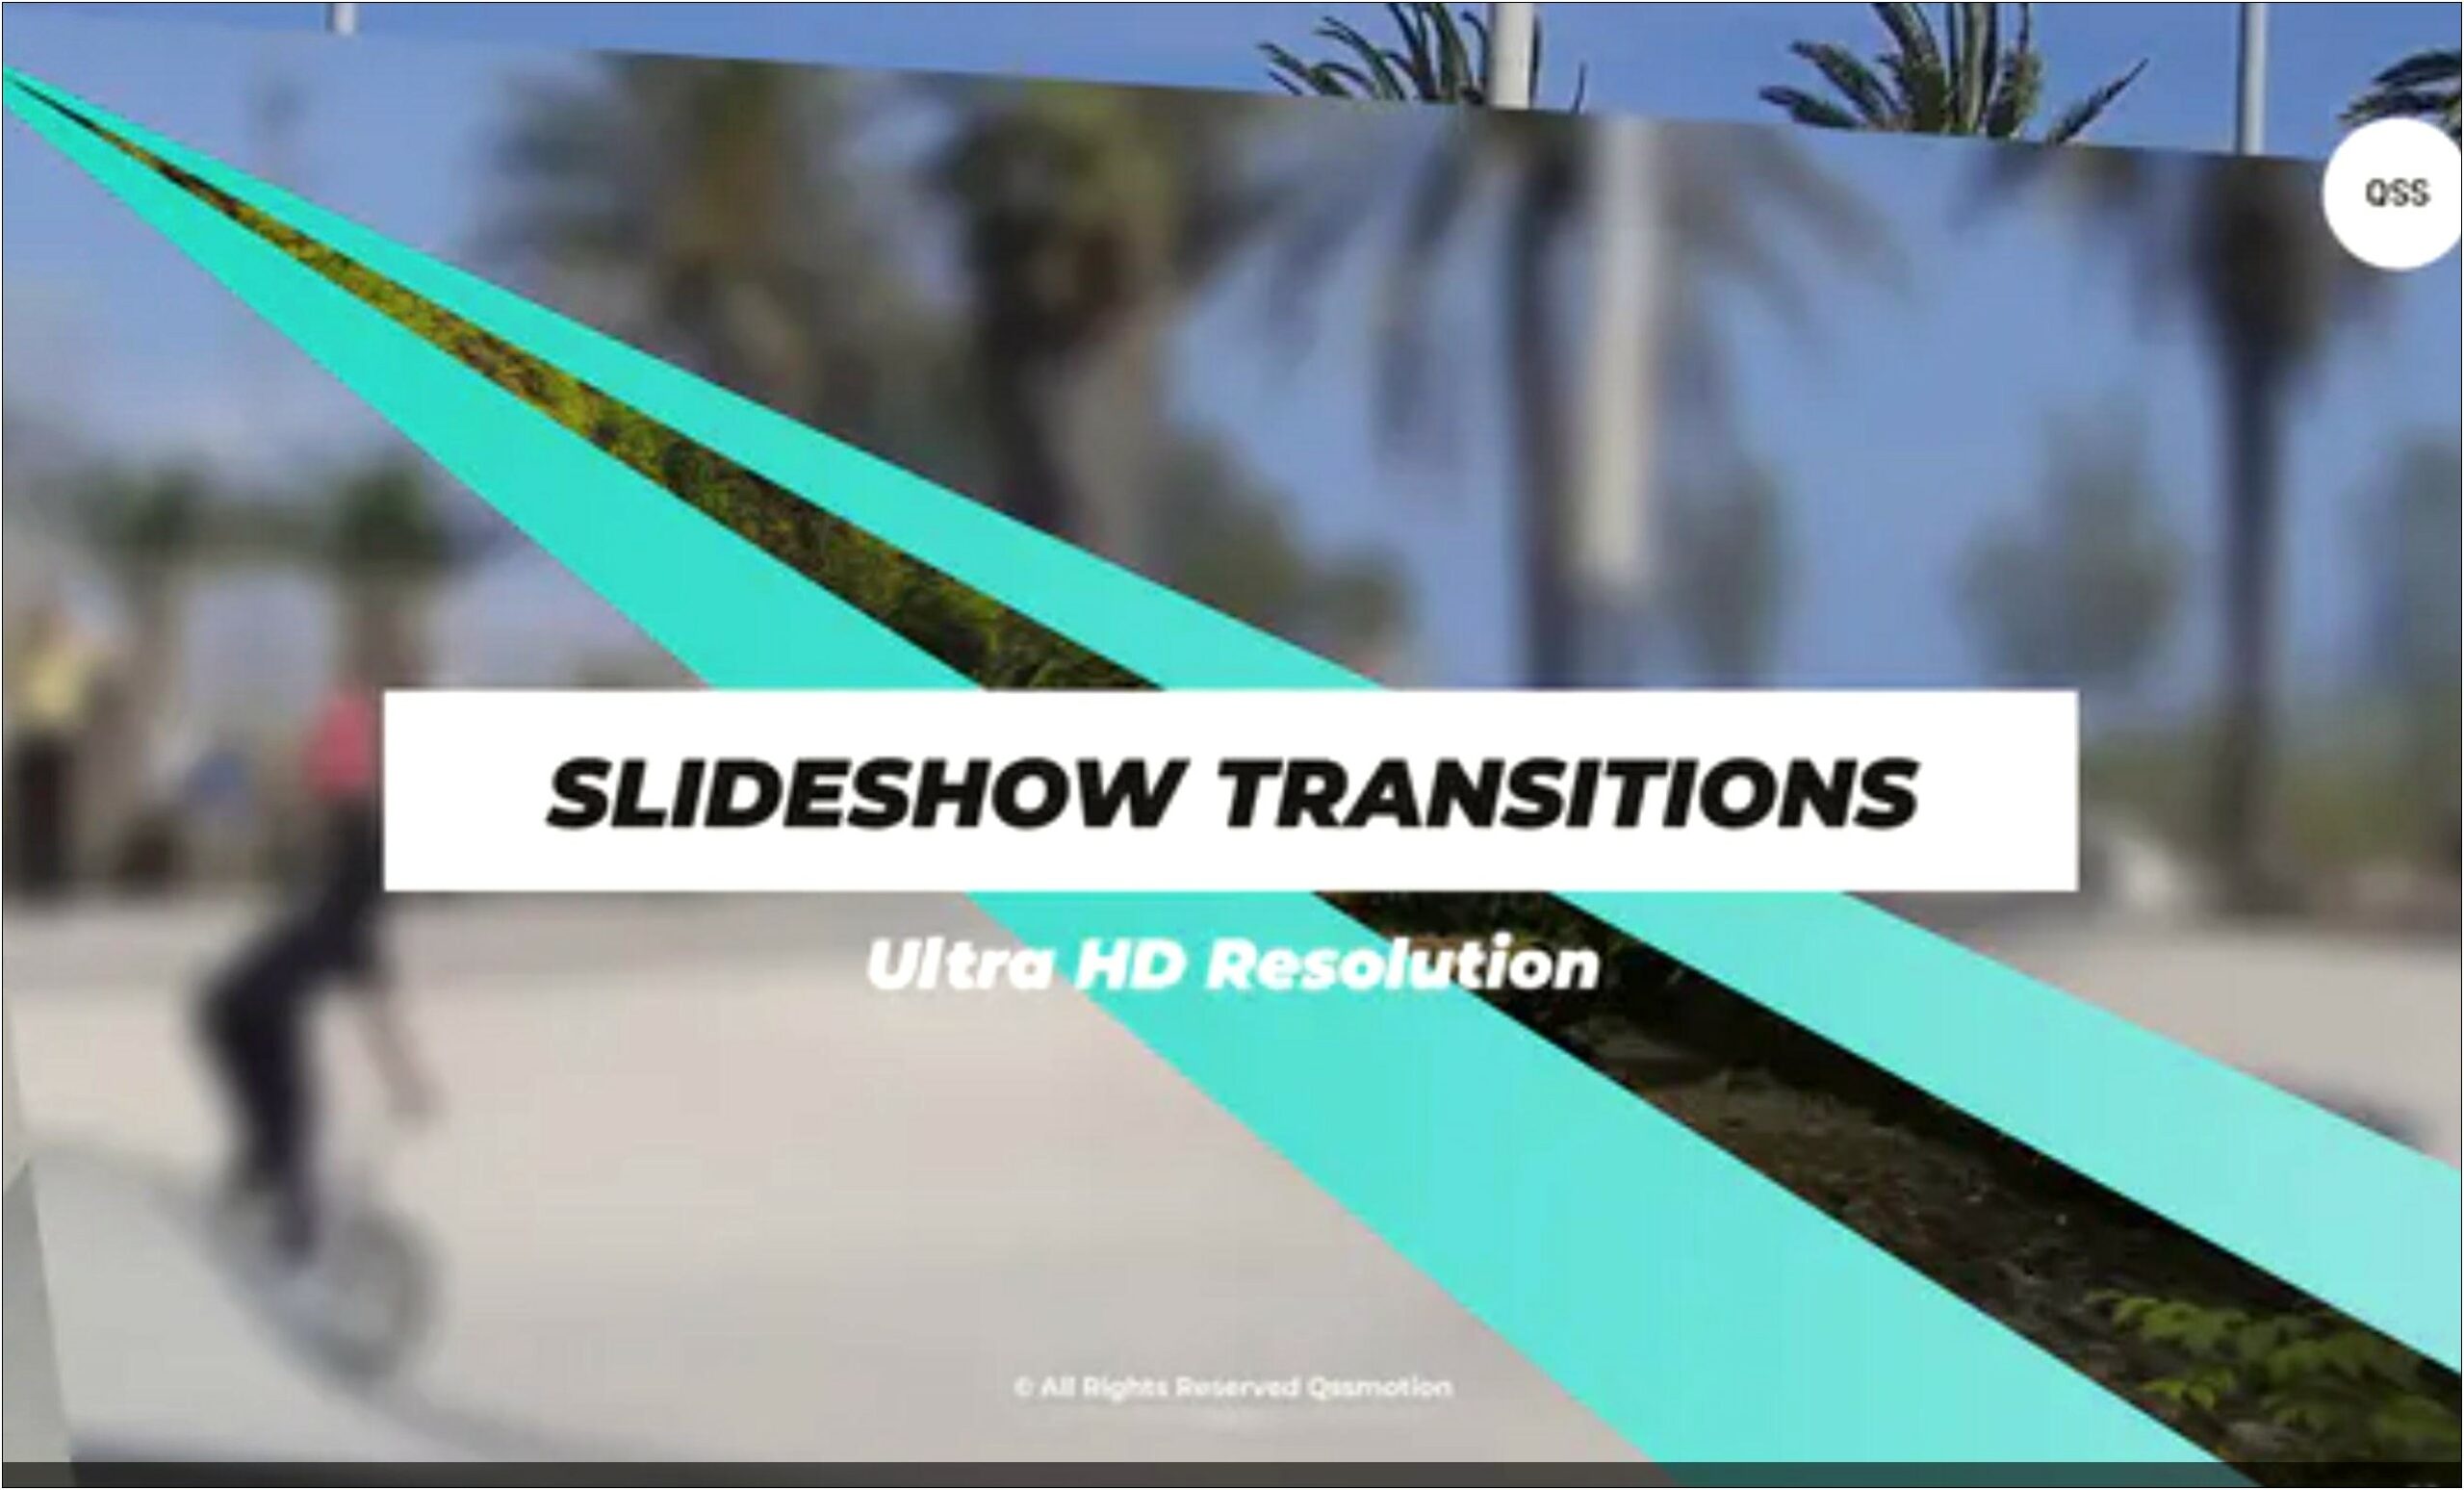 After Effects Template Free Transitions Ease Left